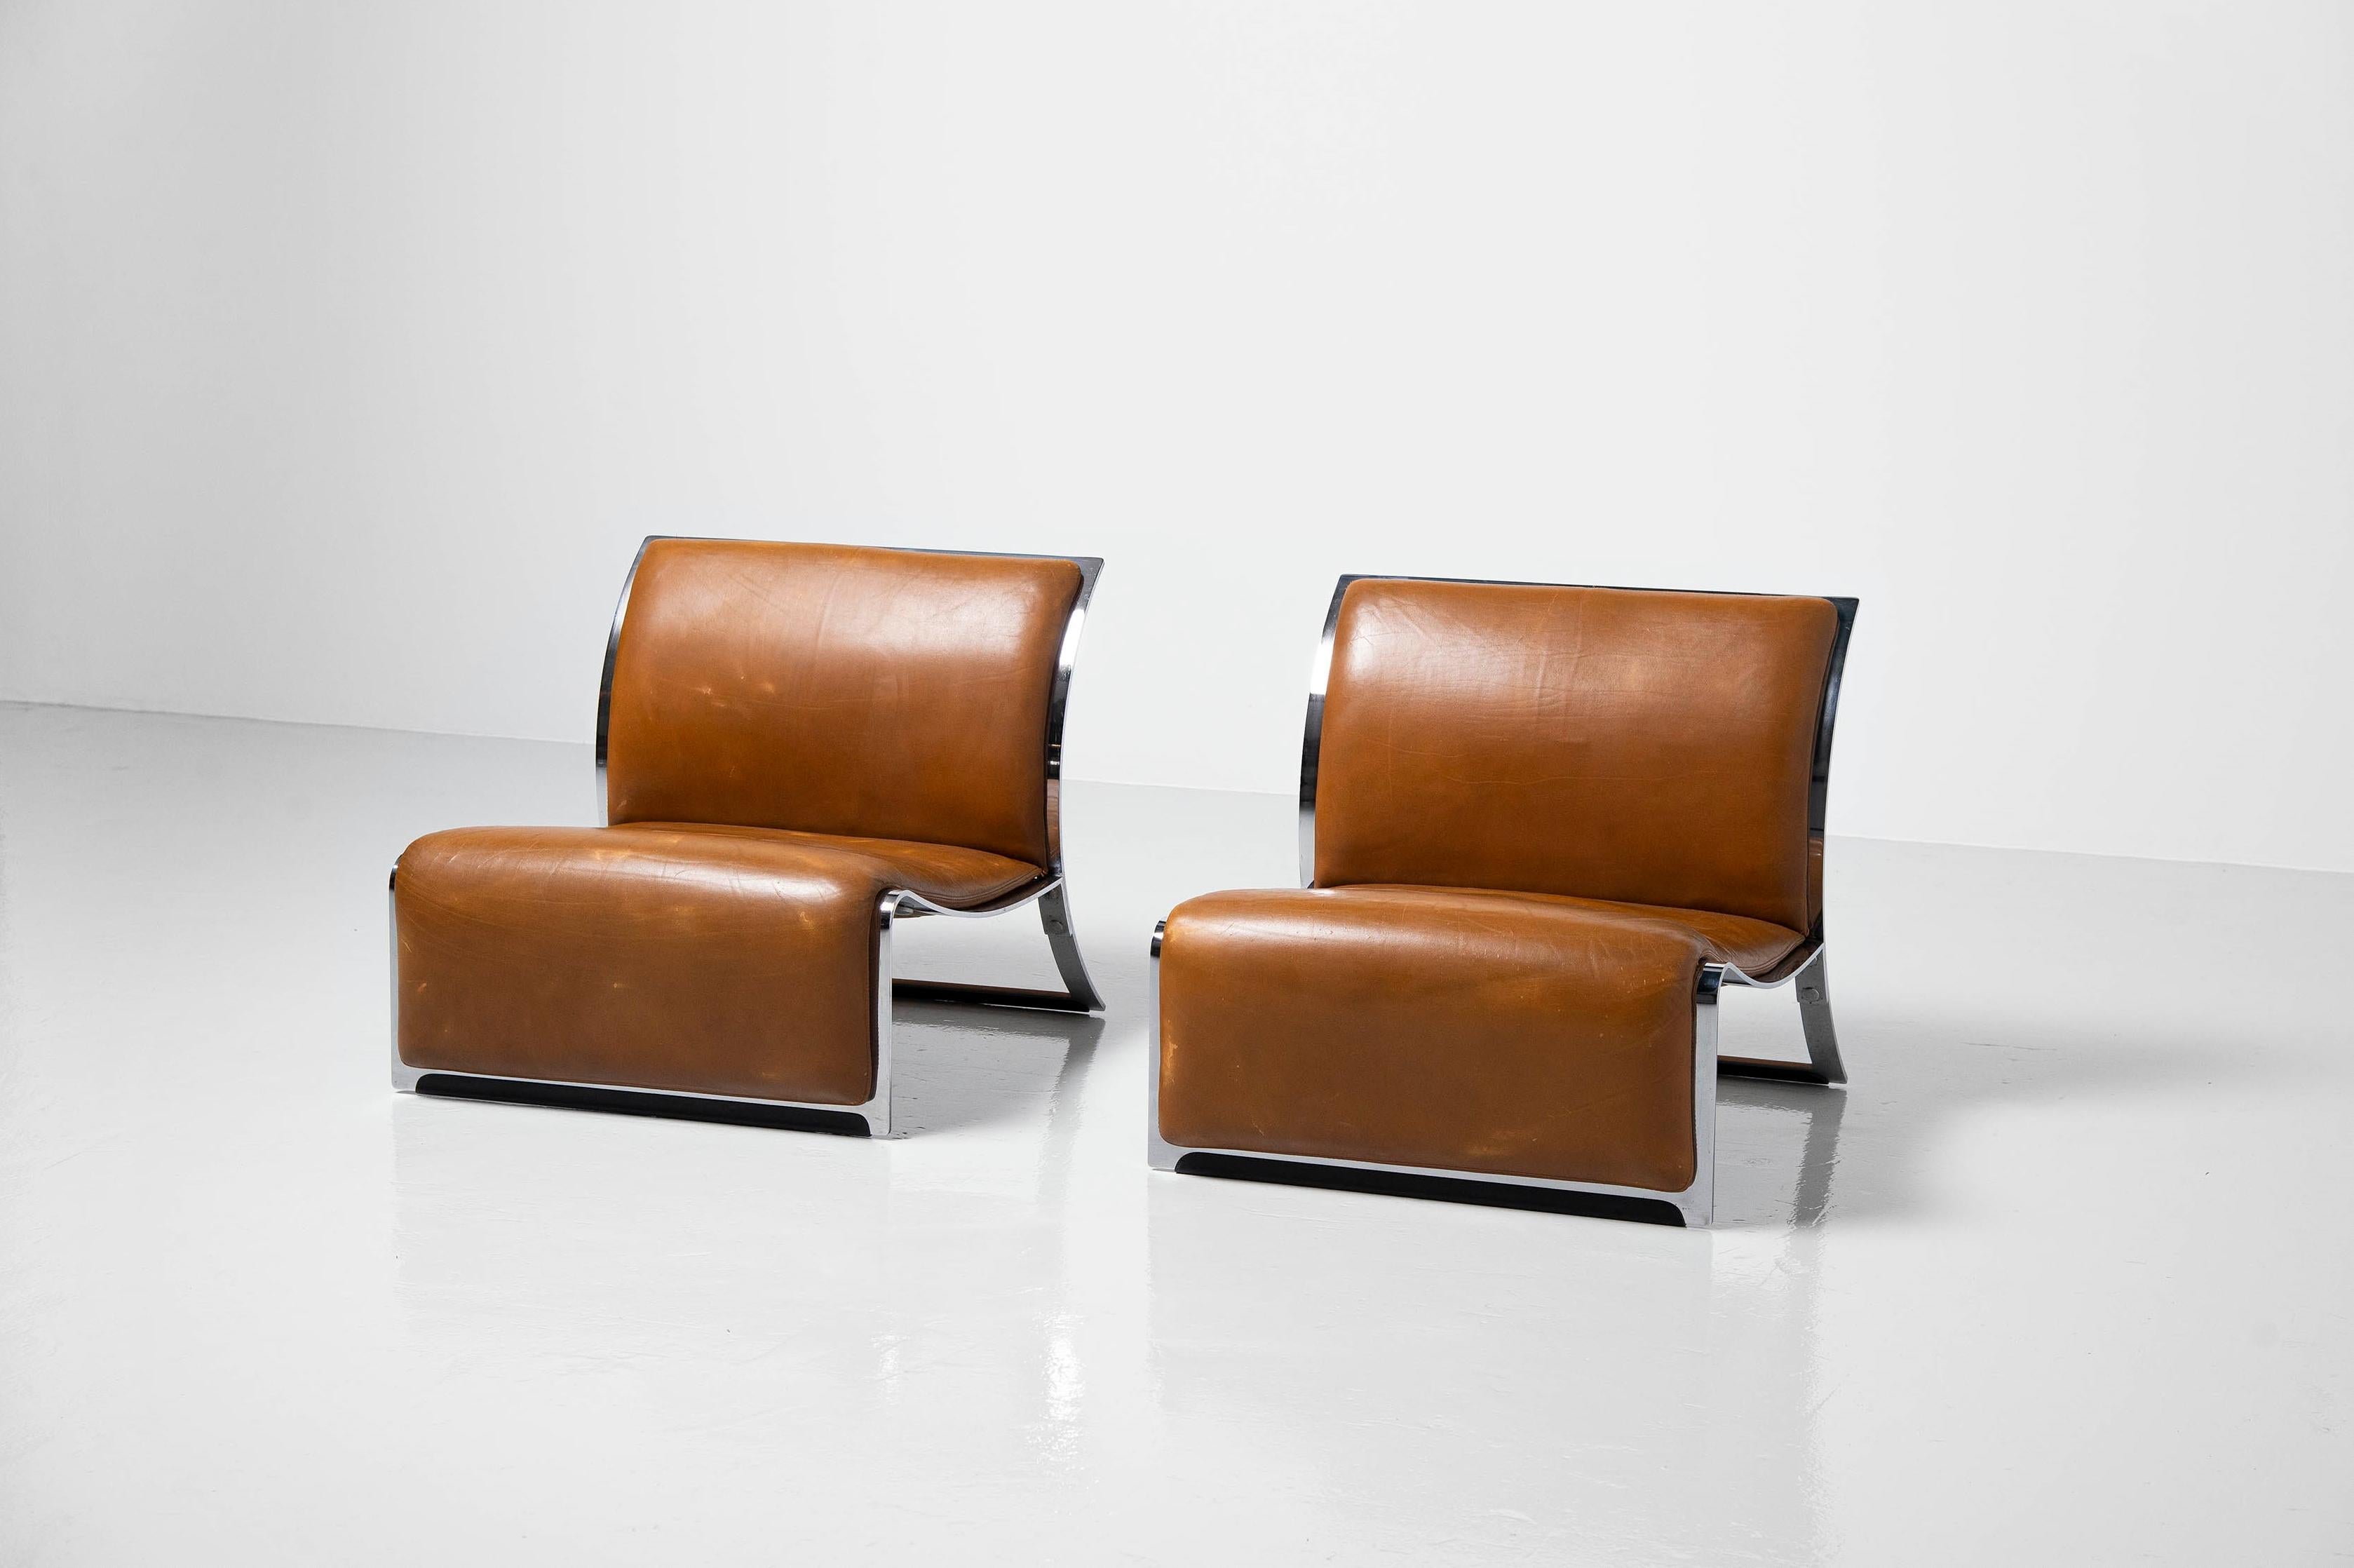 Stunning pair of lounge chairs designed by Vittorio Introini and manufactured by Saporiti, Italy 1965. The chairs have a sculptural flat steel frame which is chrome plated. The chrome plated frame and coagnac leather have a nice contrast which gives